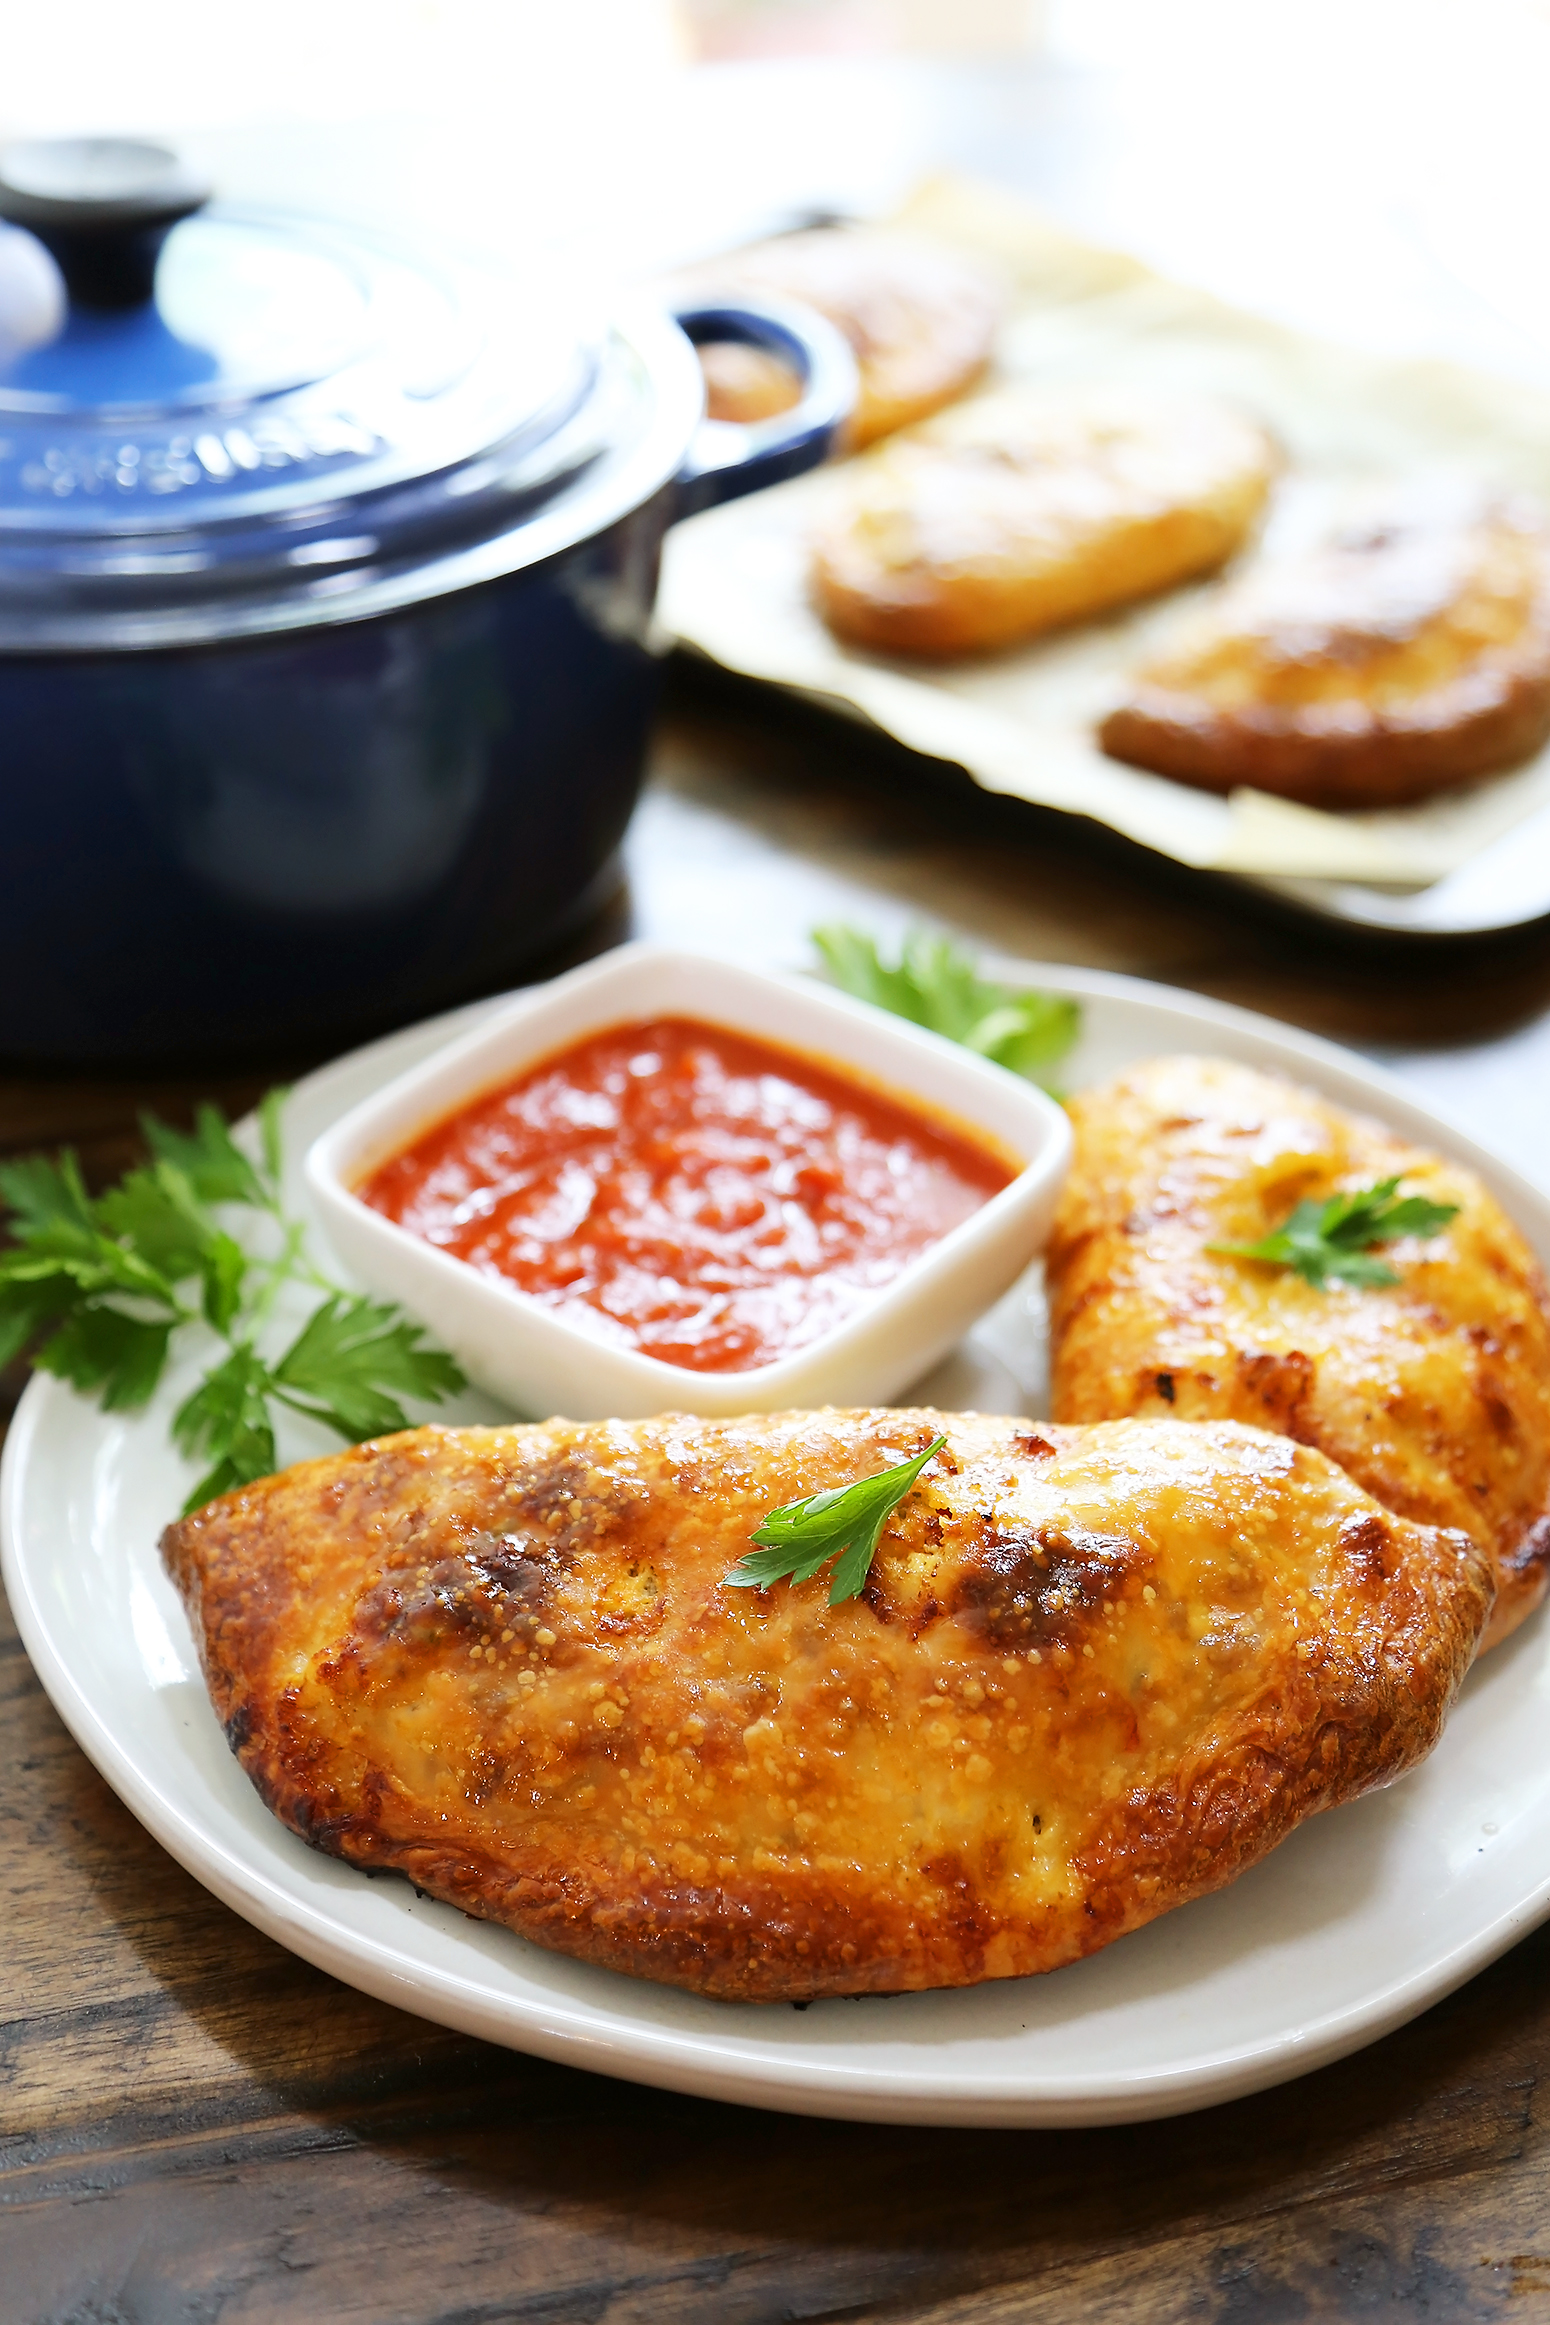 Sausage, Ricotta and Veggie Calzones - Crispy, golden calzones with easy, family friendly ingredients. So delicious dunked in marinara sauce! thecomfortofcooking.com